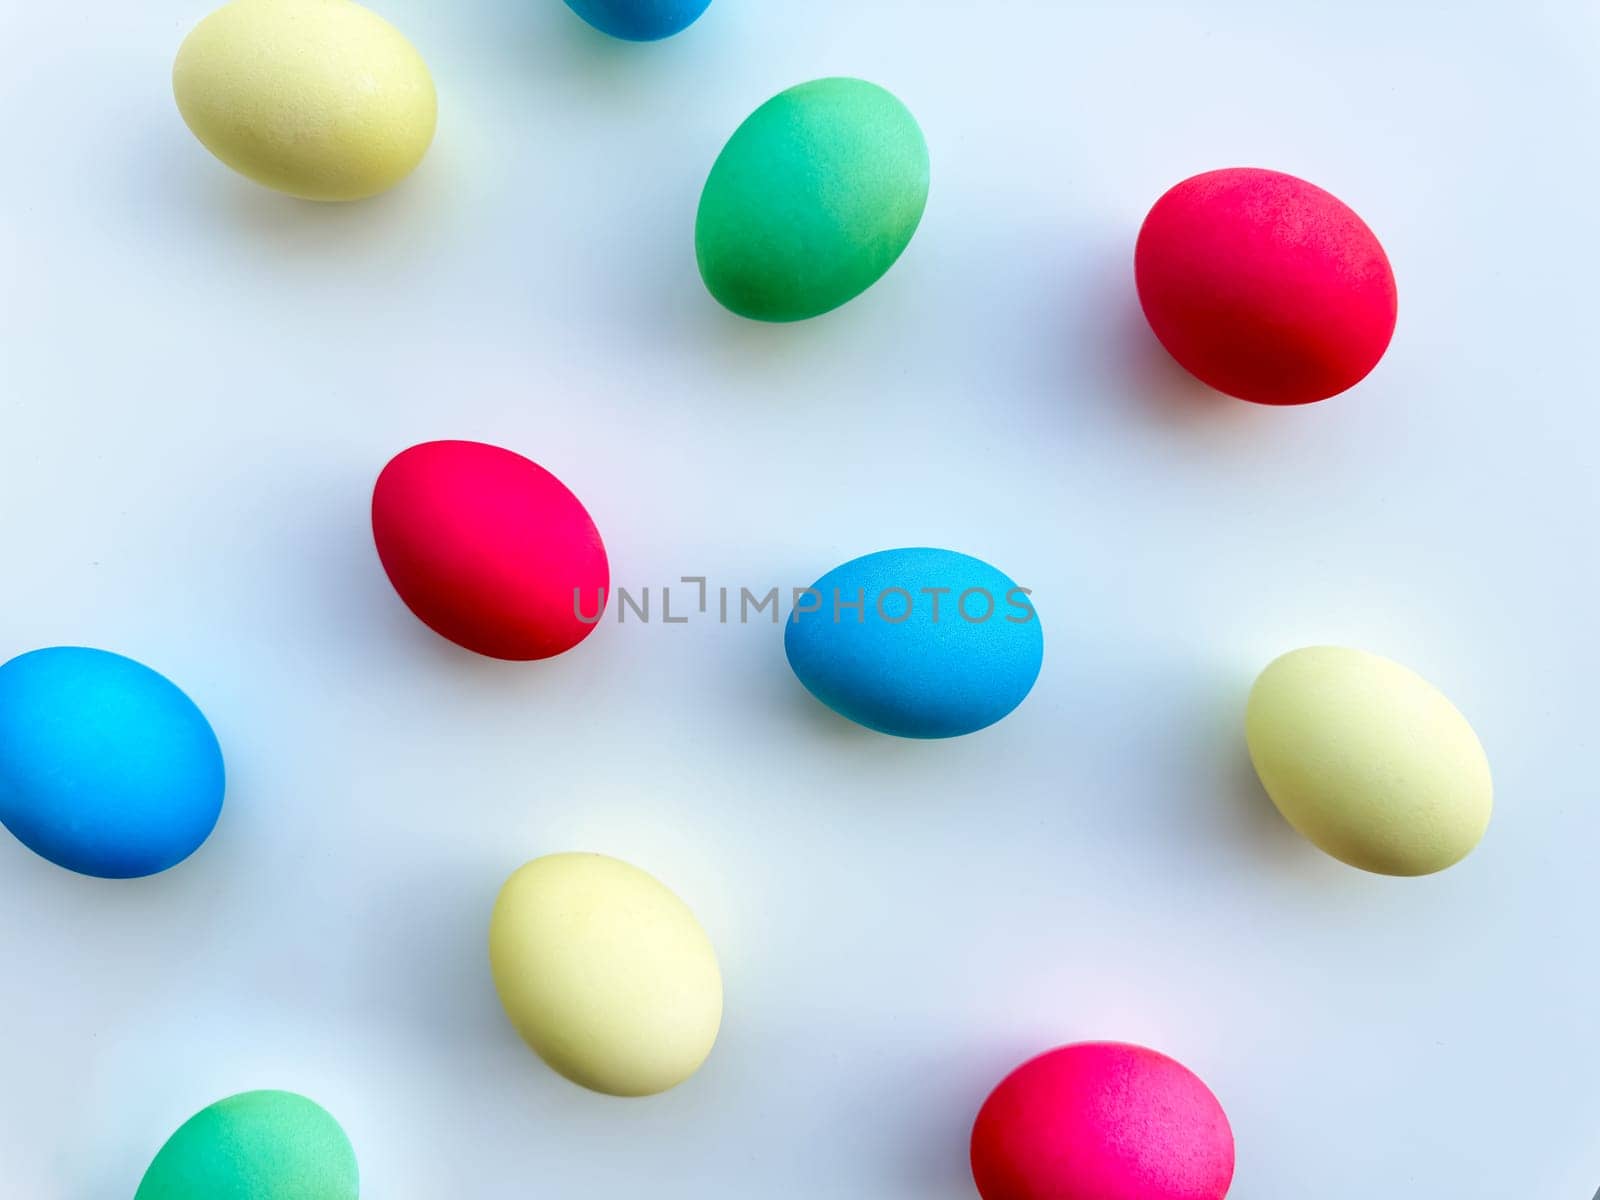 Colorful Easter eggs scattered on white background, flat lay composition for spring holiday celebration and decoration ideas. For Easter holiday promotions, themed party invitations, seasonal blog posts, educational materials about Easter, background imagery for websites and social media platforms celebrating the spring season. by Lunnica